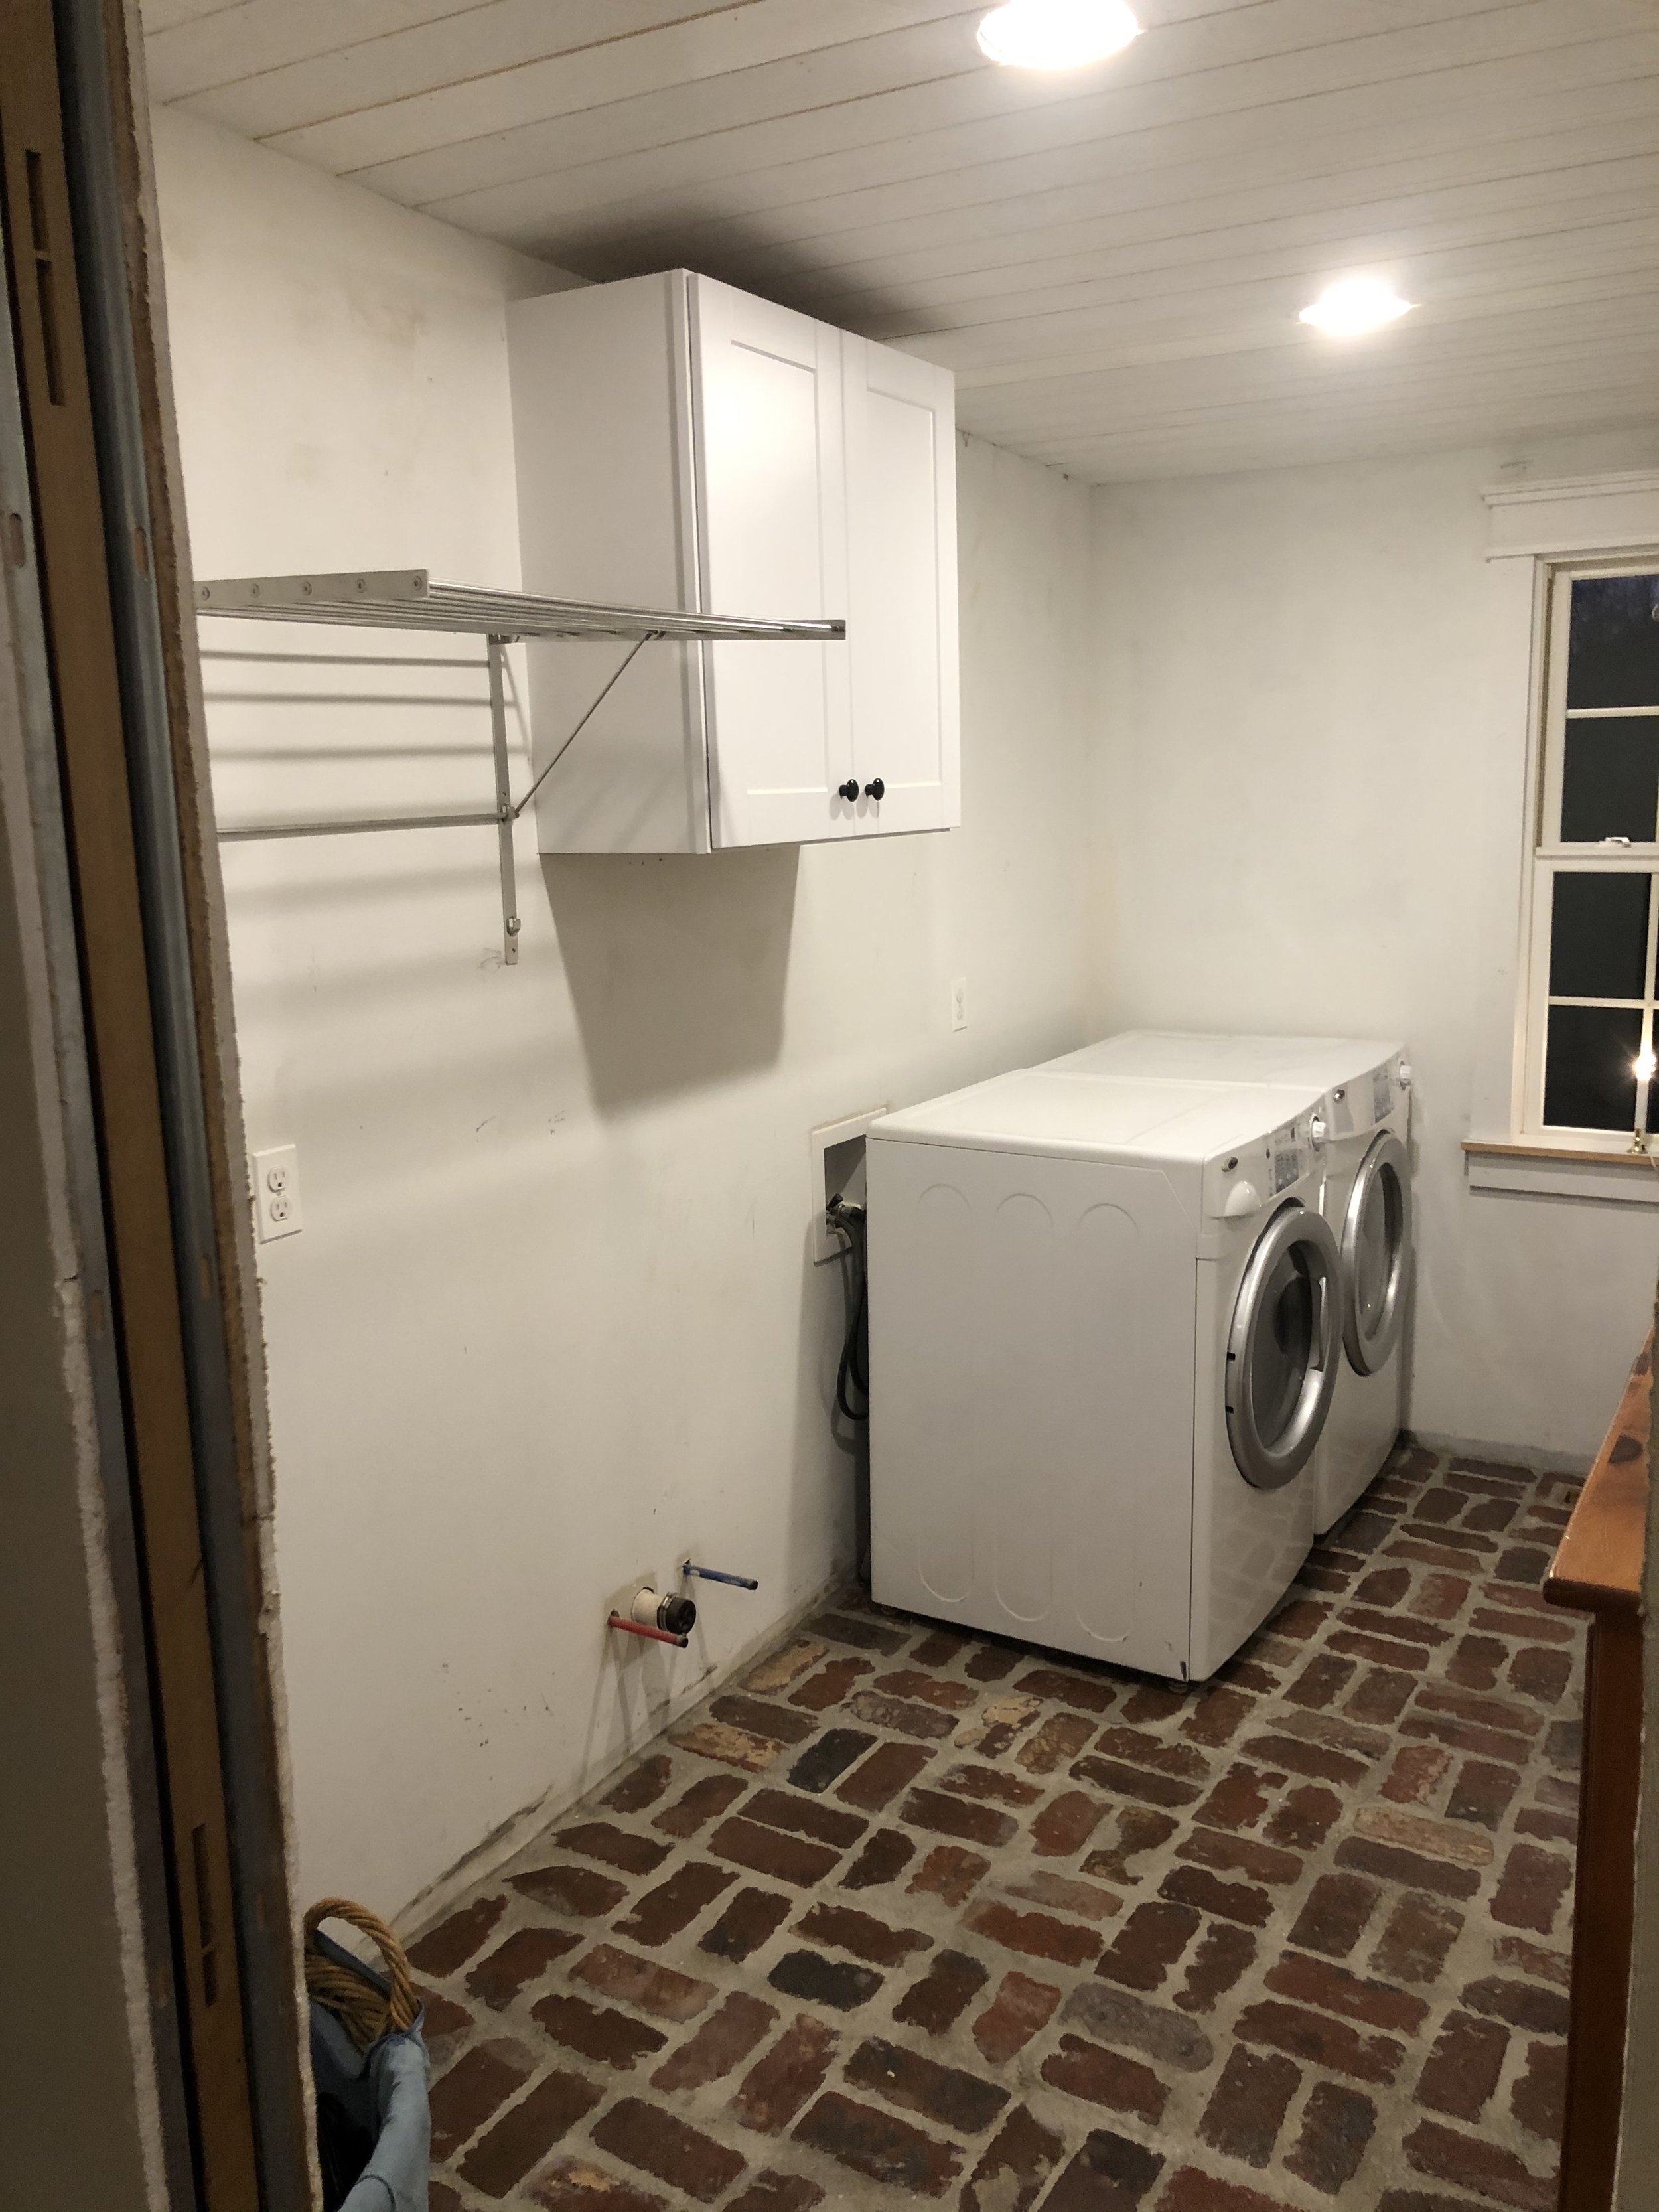  With the brick floors and ceiling done for the time being, I moved the washer and dryer back into the room while I worked on the final cabinet design.  